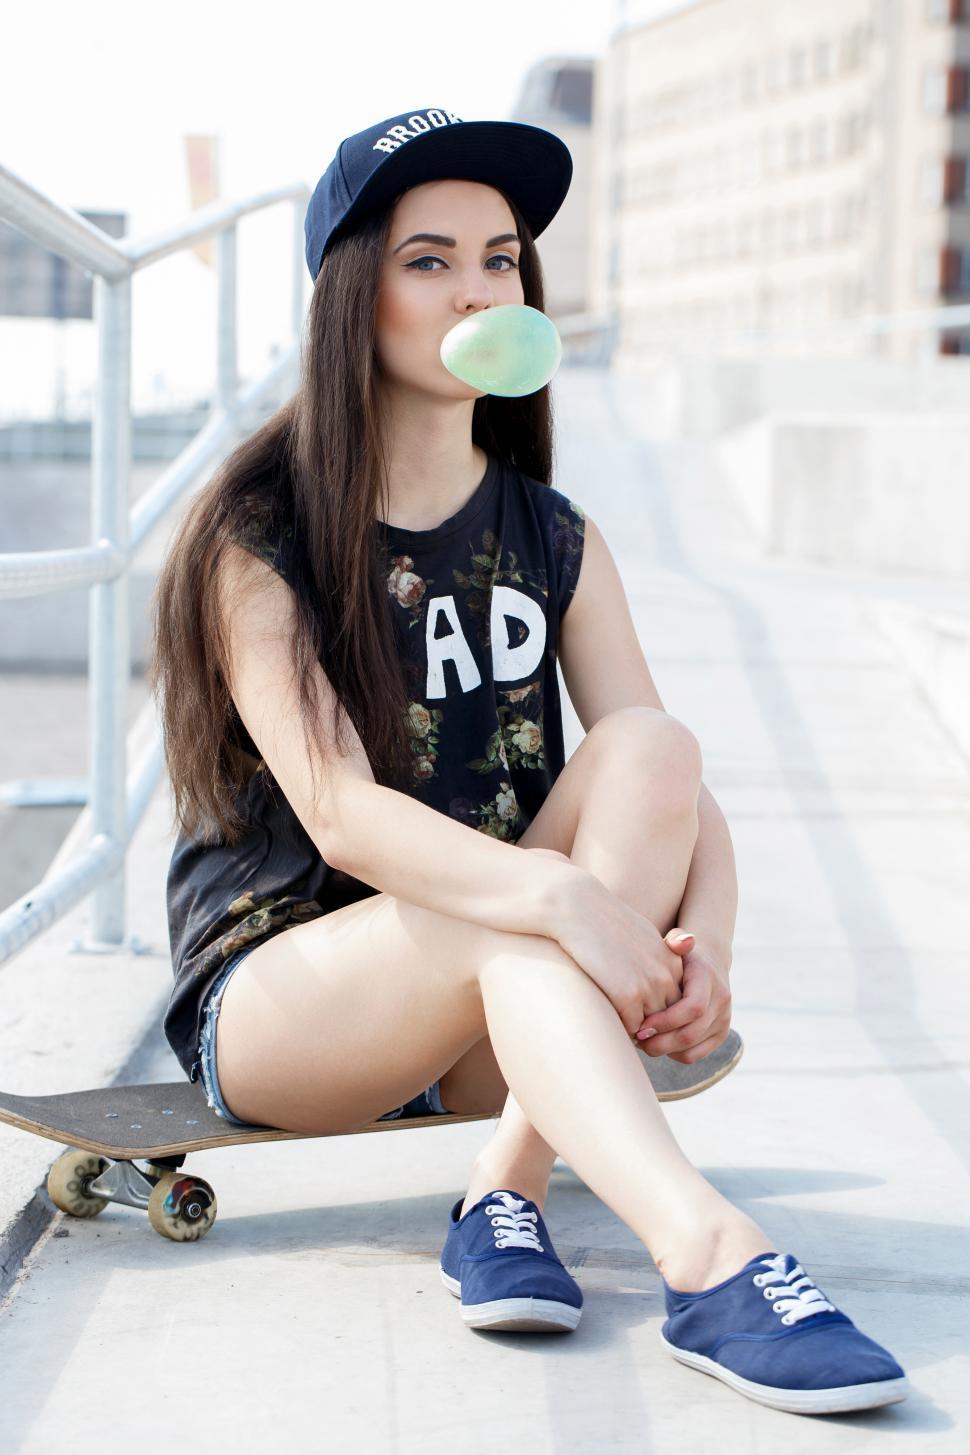 Free Image of Alternative girl with bubblegum and skateboard 